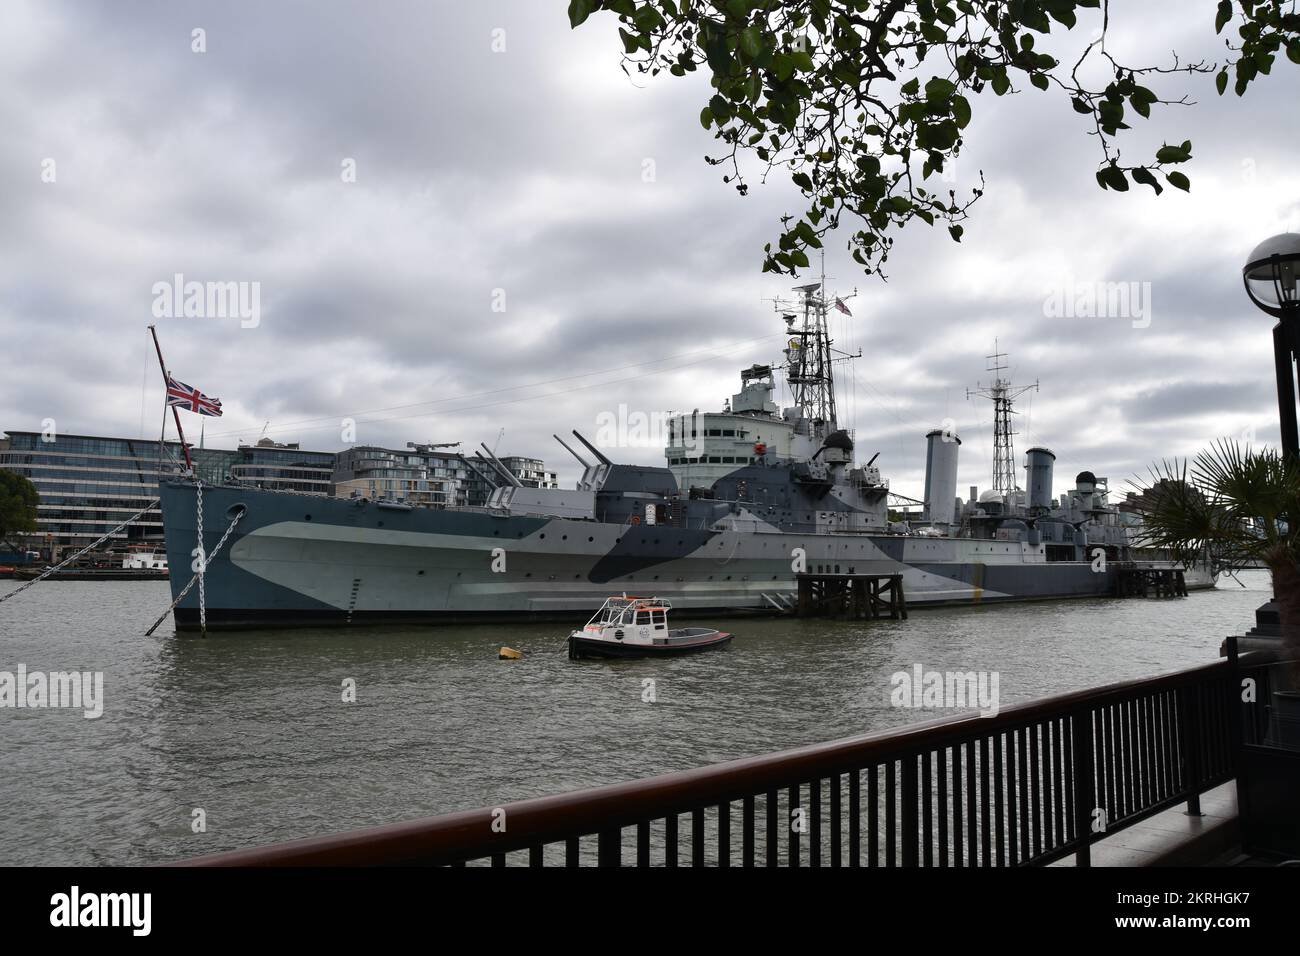 View on HMS Belfast, a famous WWII battleship, moored on the River Thames. Stock Photo